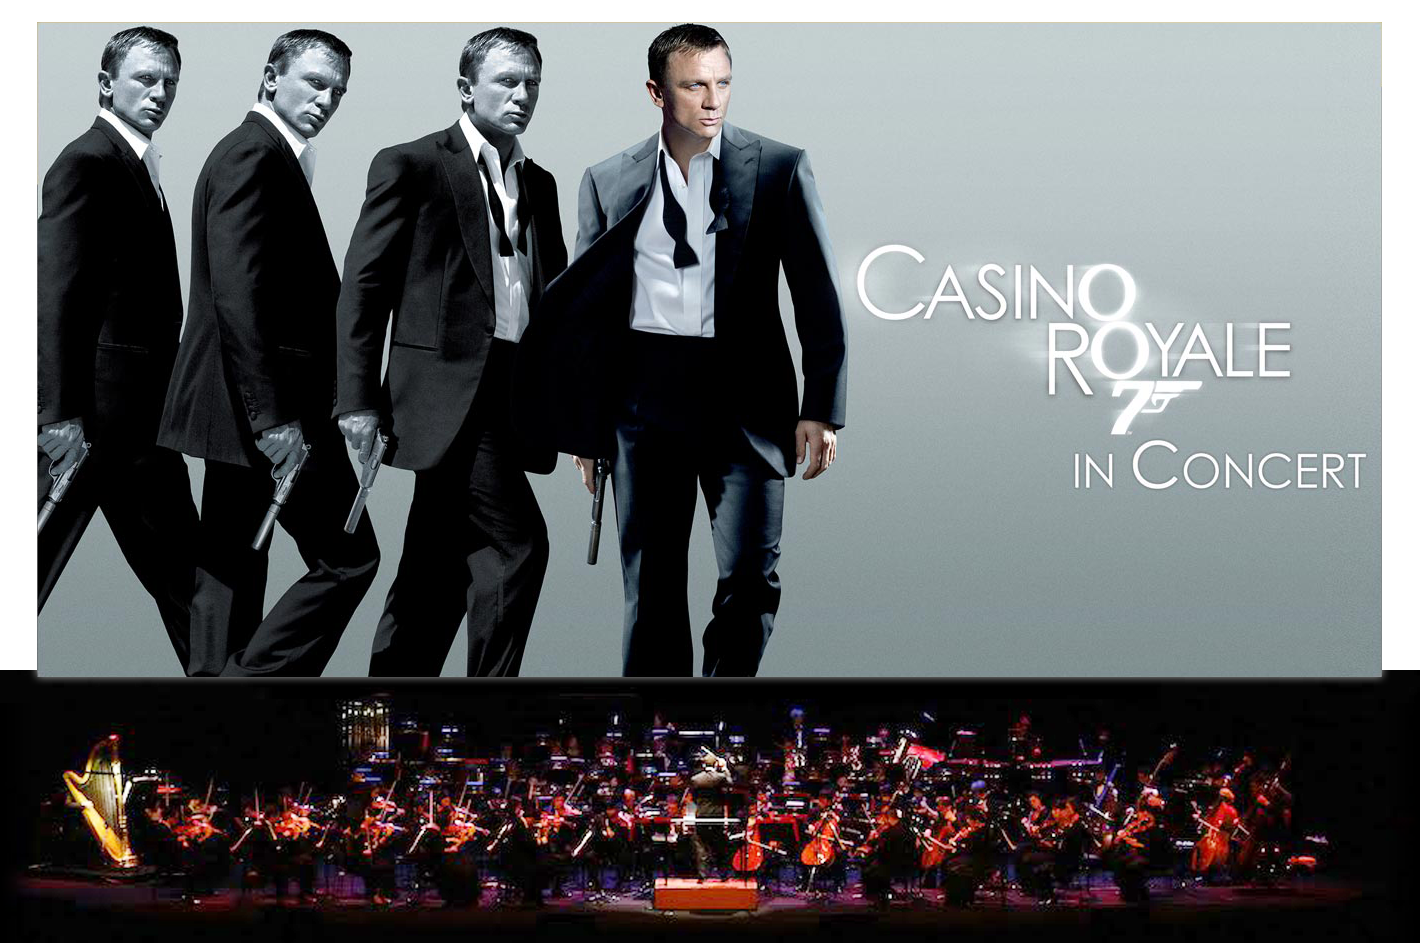 CASINO ROYALE 7 IN CONCERT